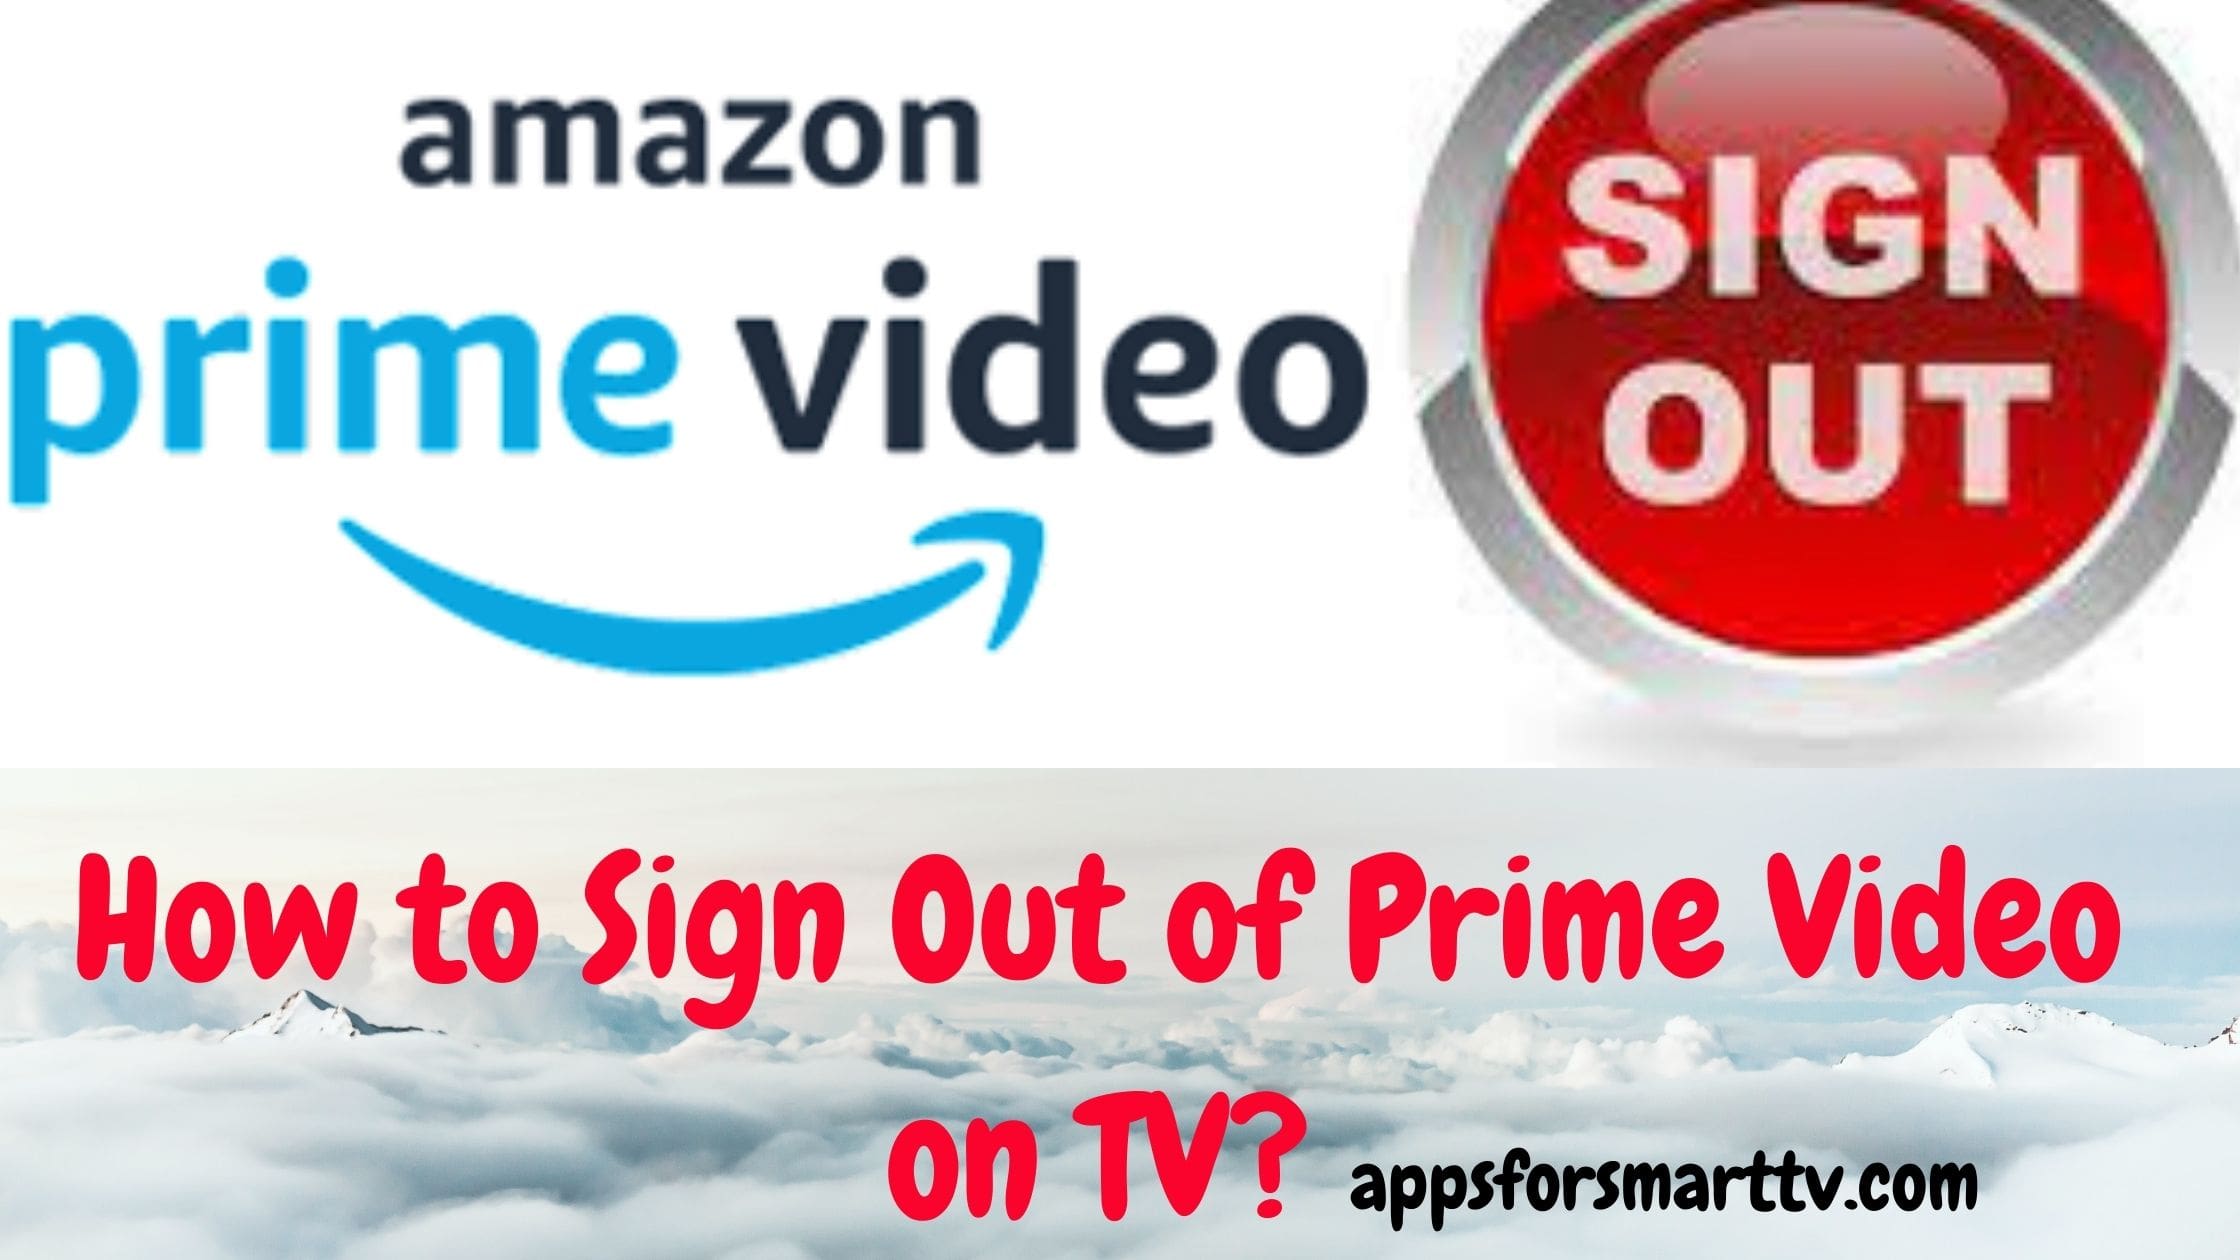 How to Sign Out of Prime Video on TV?